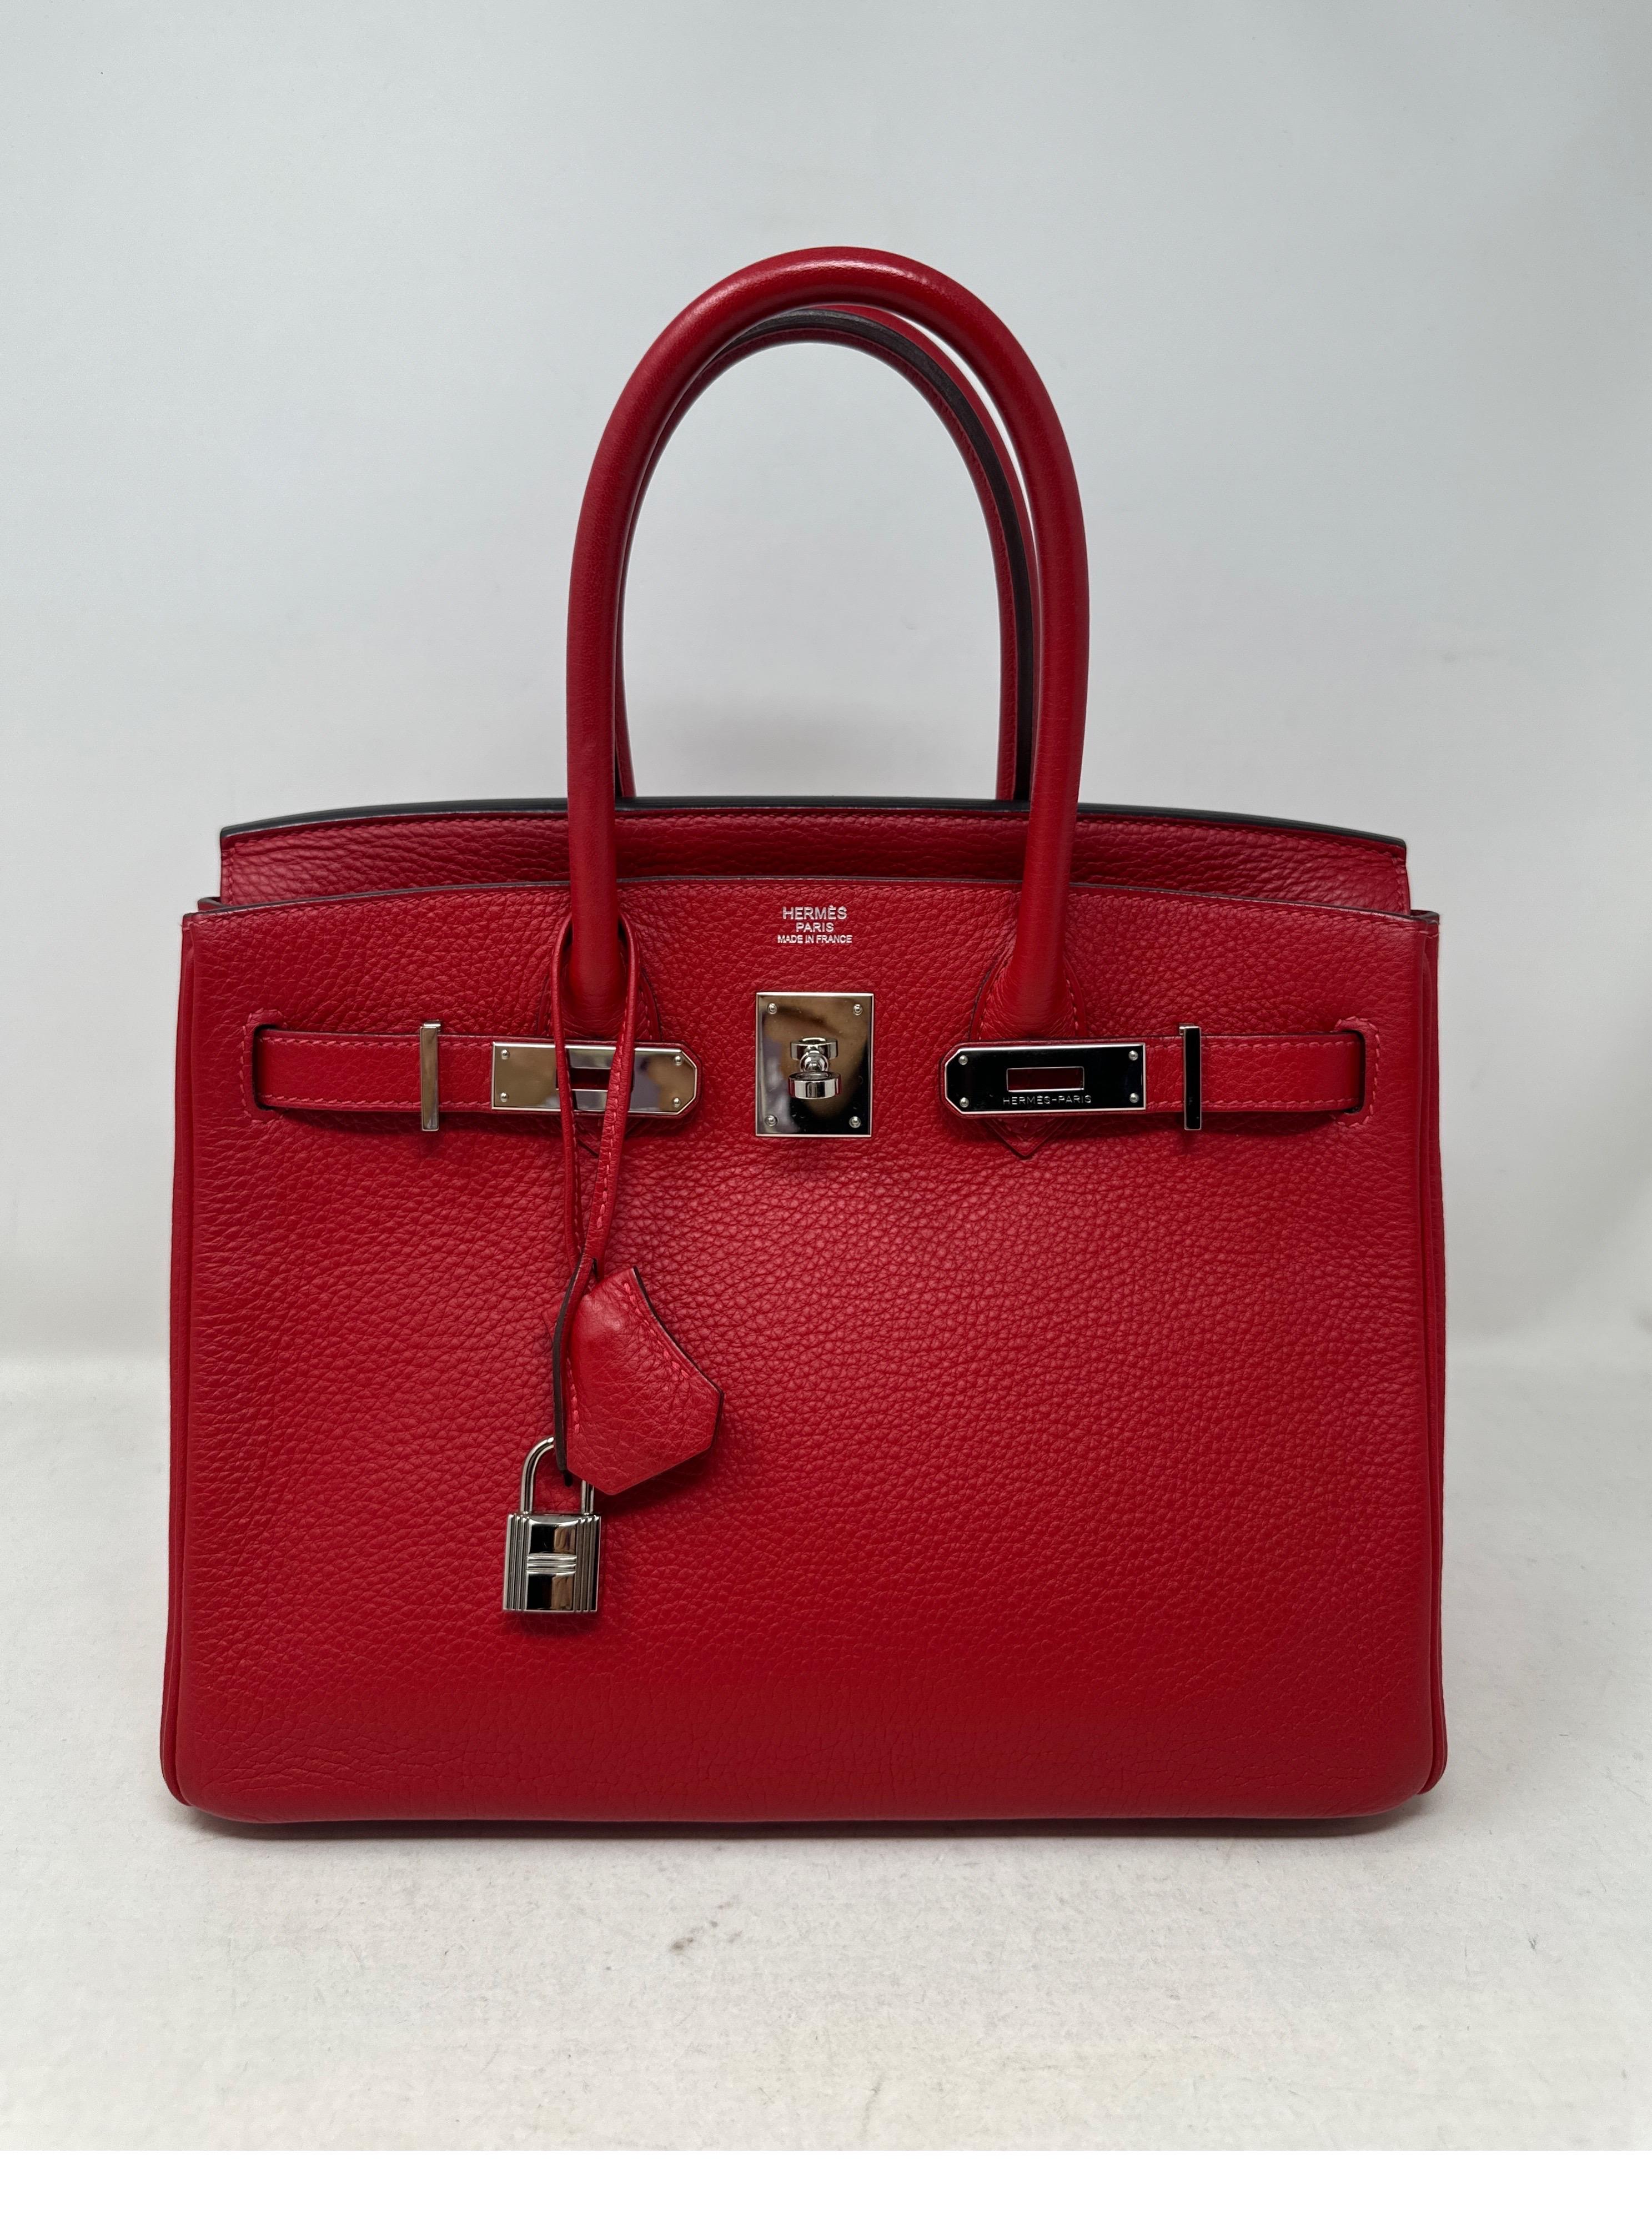 Hermes Rouge Casaque Birkin 30 Bag. Excellent condition. Beautiful true red color. Palladium silver hardware. Togo leather. Excellent condition. Interior clean. Includes clochette, lock, keys, and dust bag. Guaranteed authentic. 